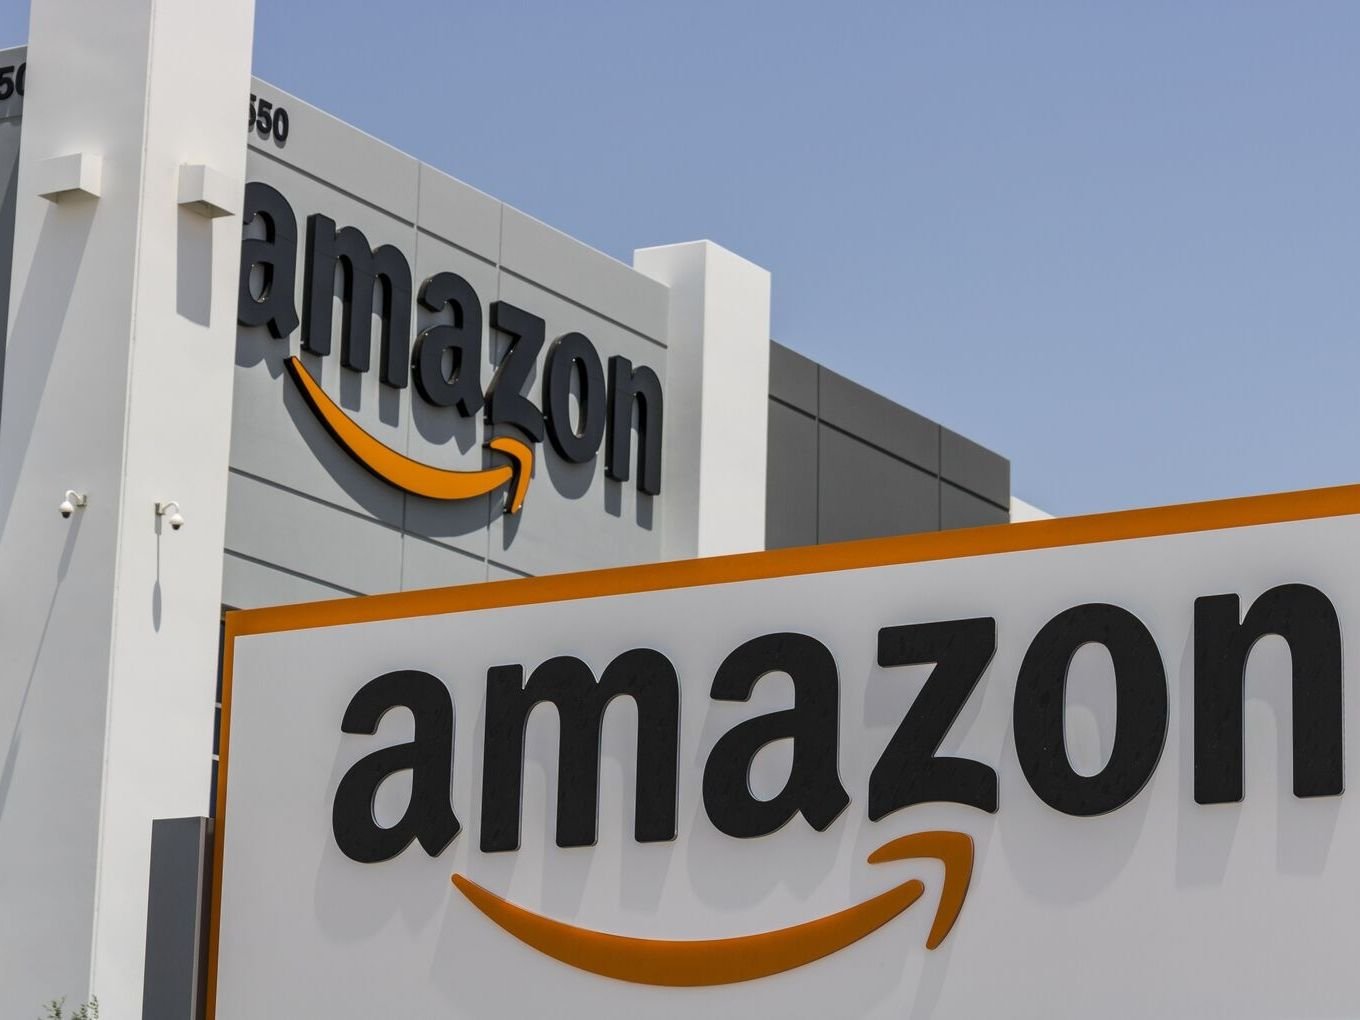 Amazon Investment In India Falls By Two-Thirds, Compared To 2018